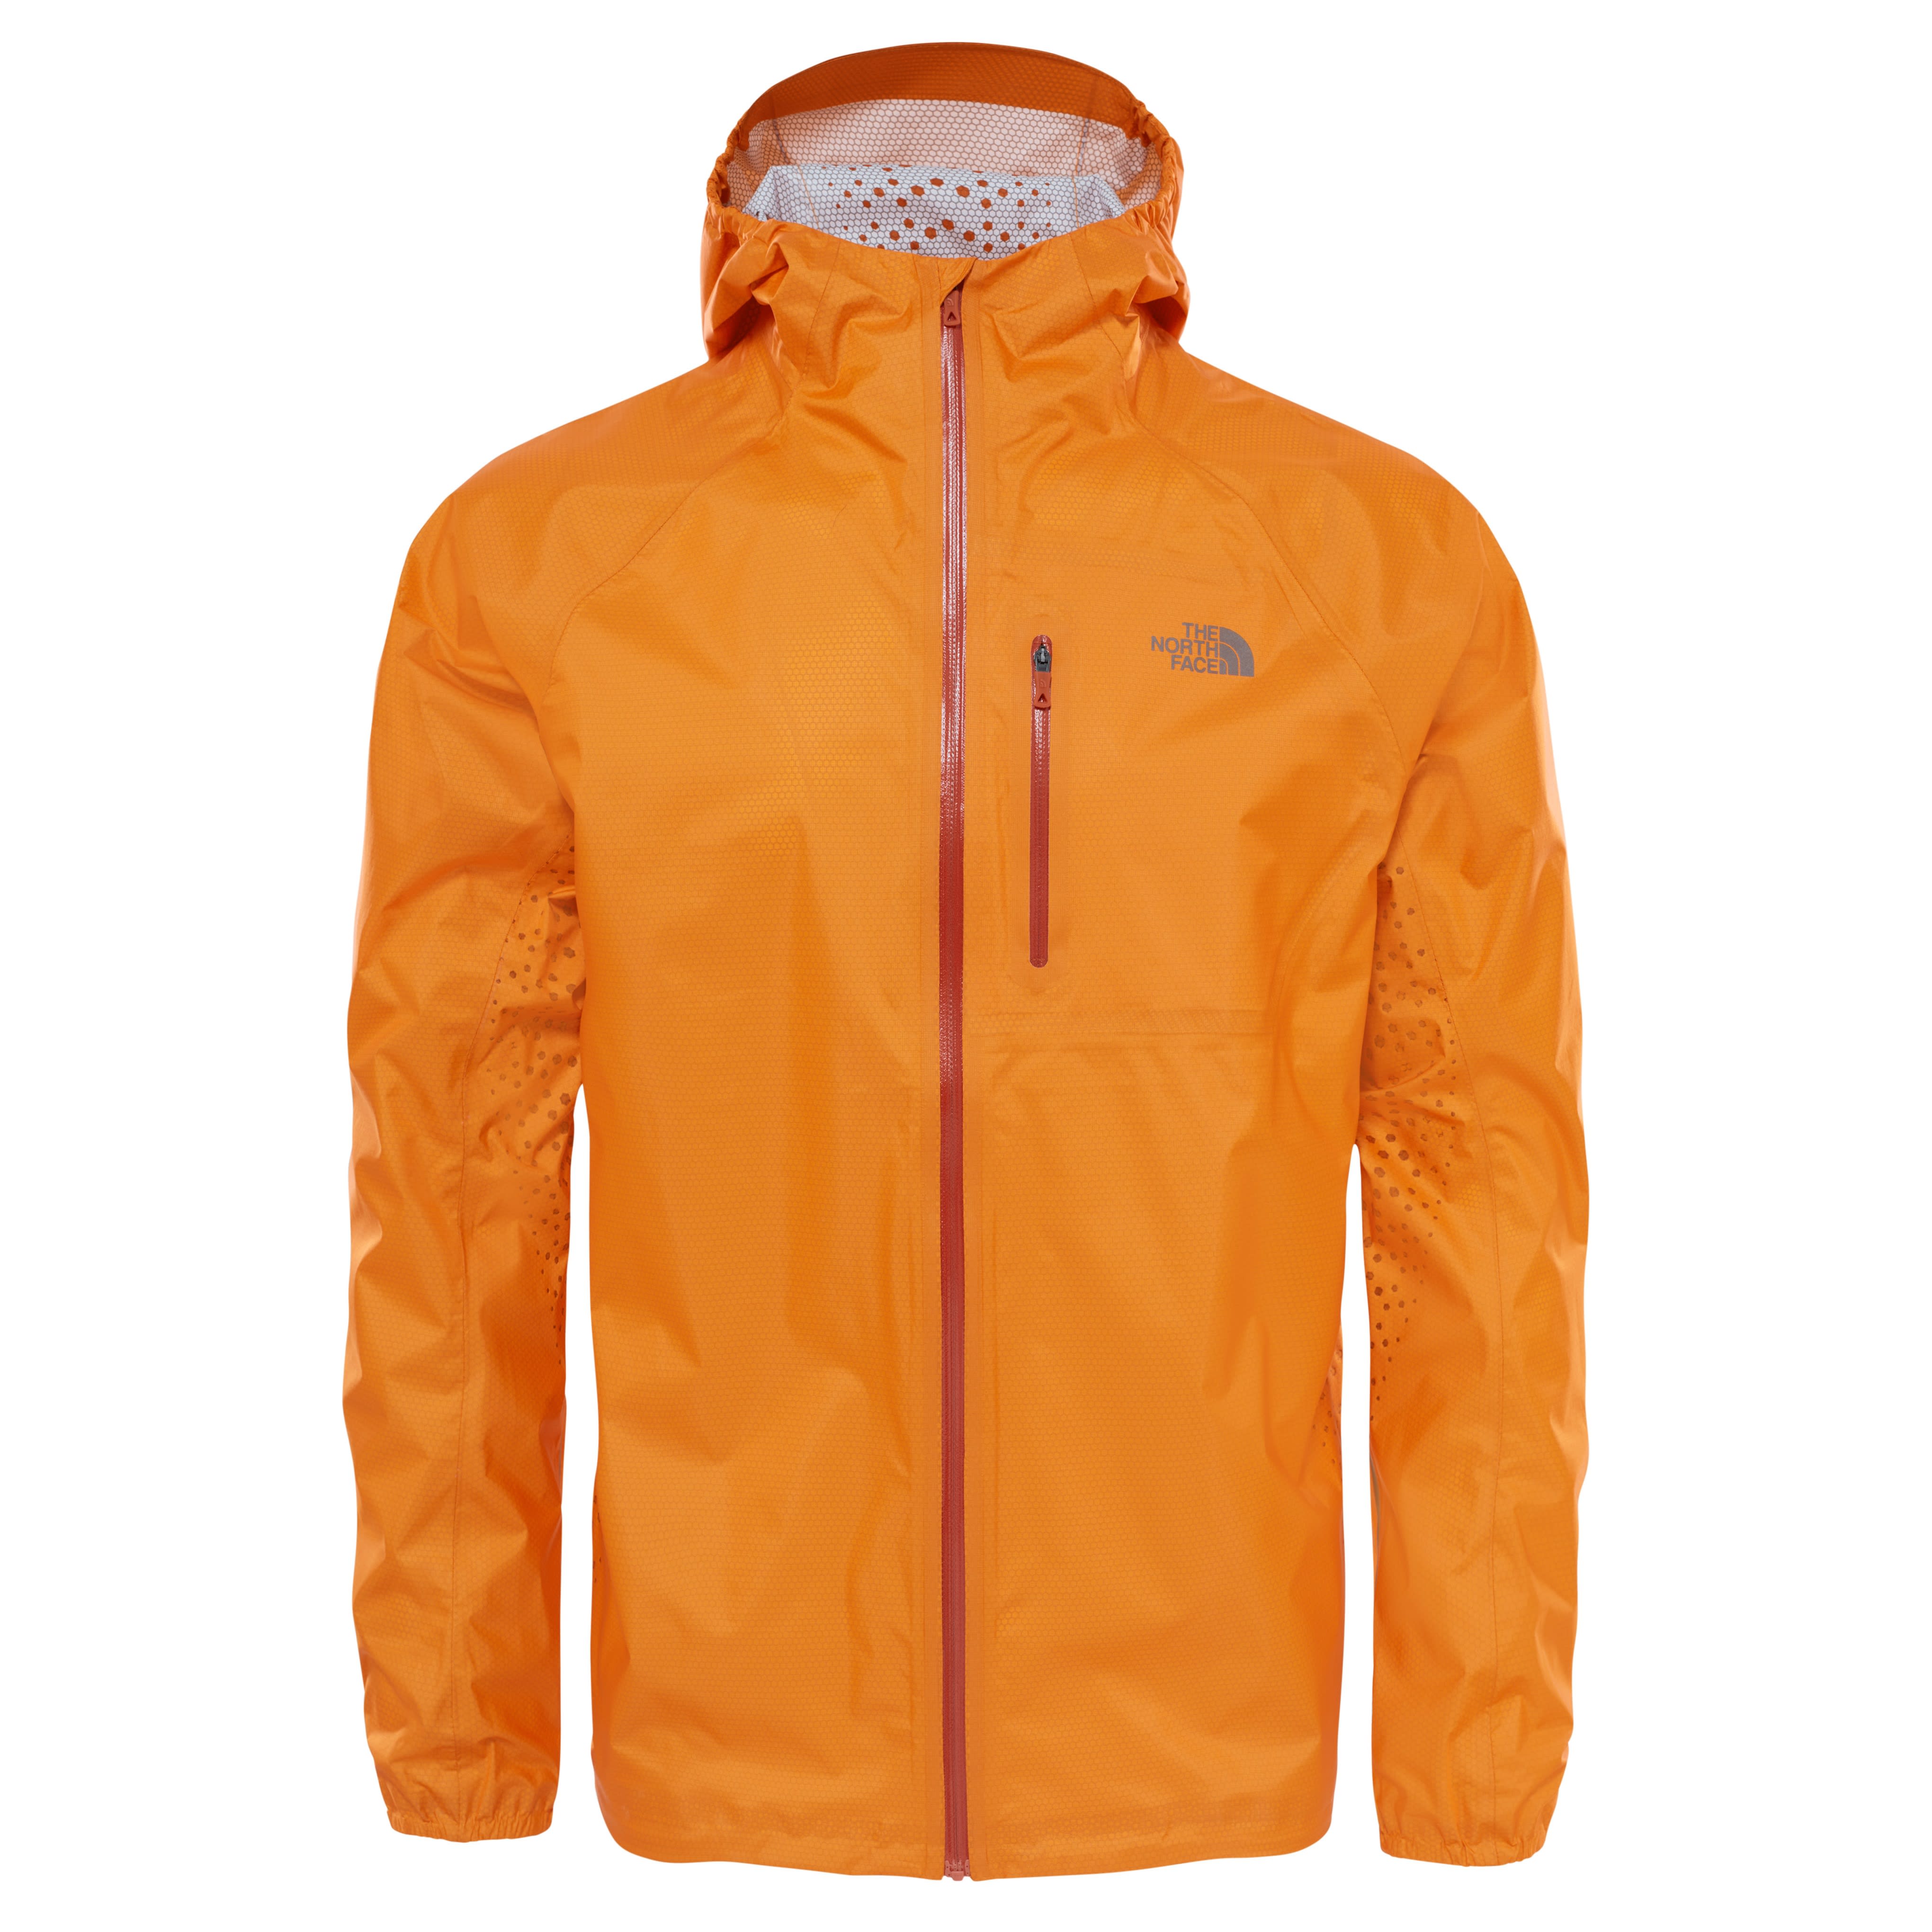 Flight Series Fuse Jacket from Outnorth